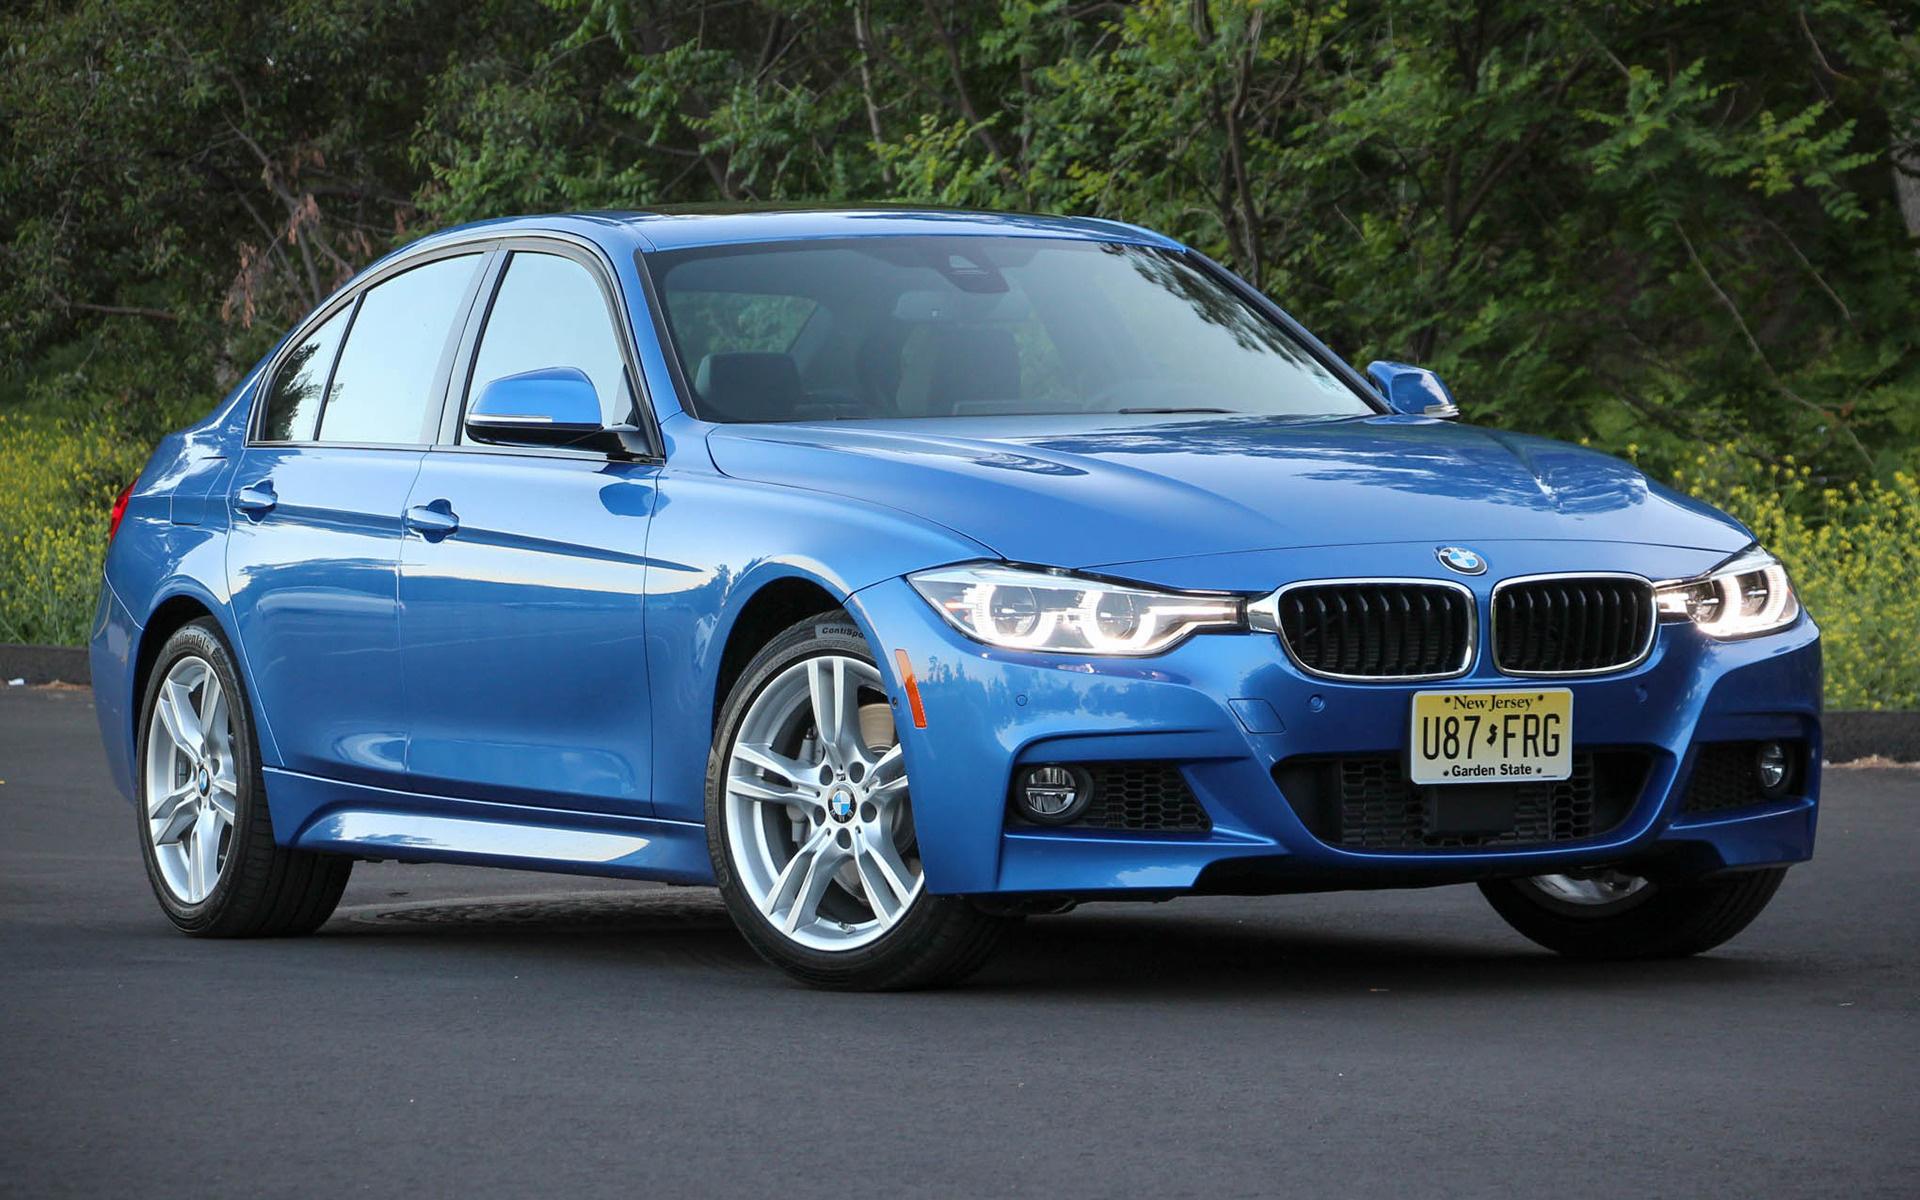 BMW 3 Series M Sport (US) and HD Image